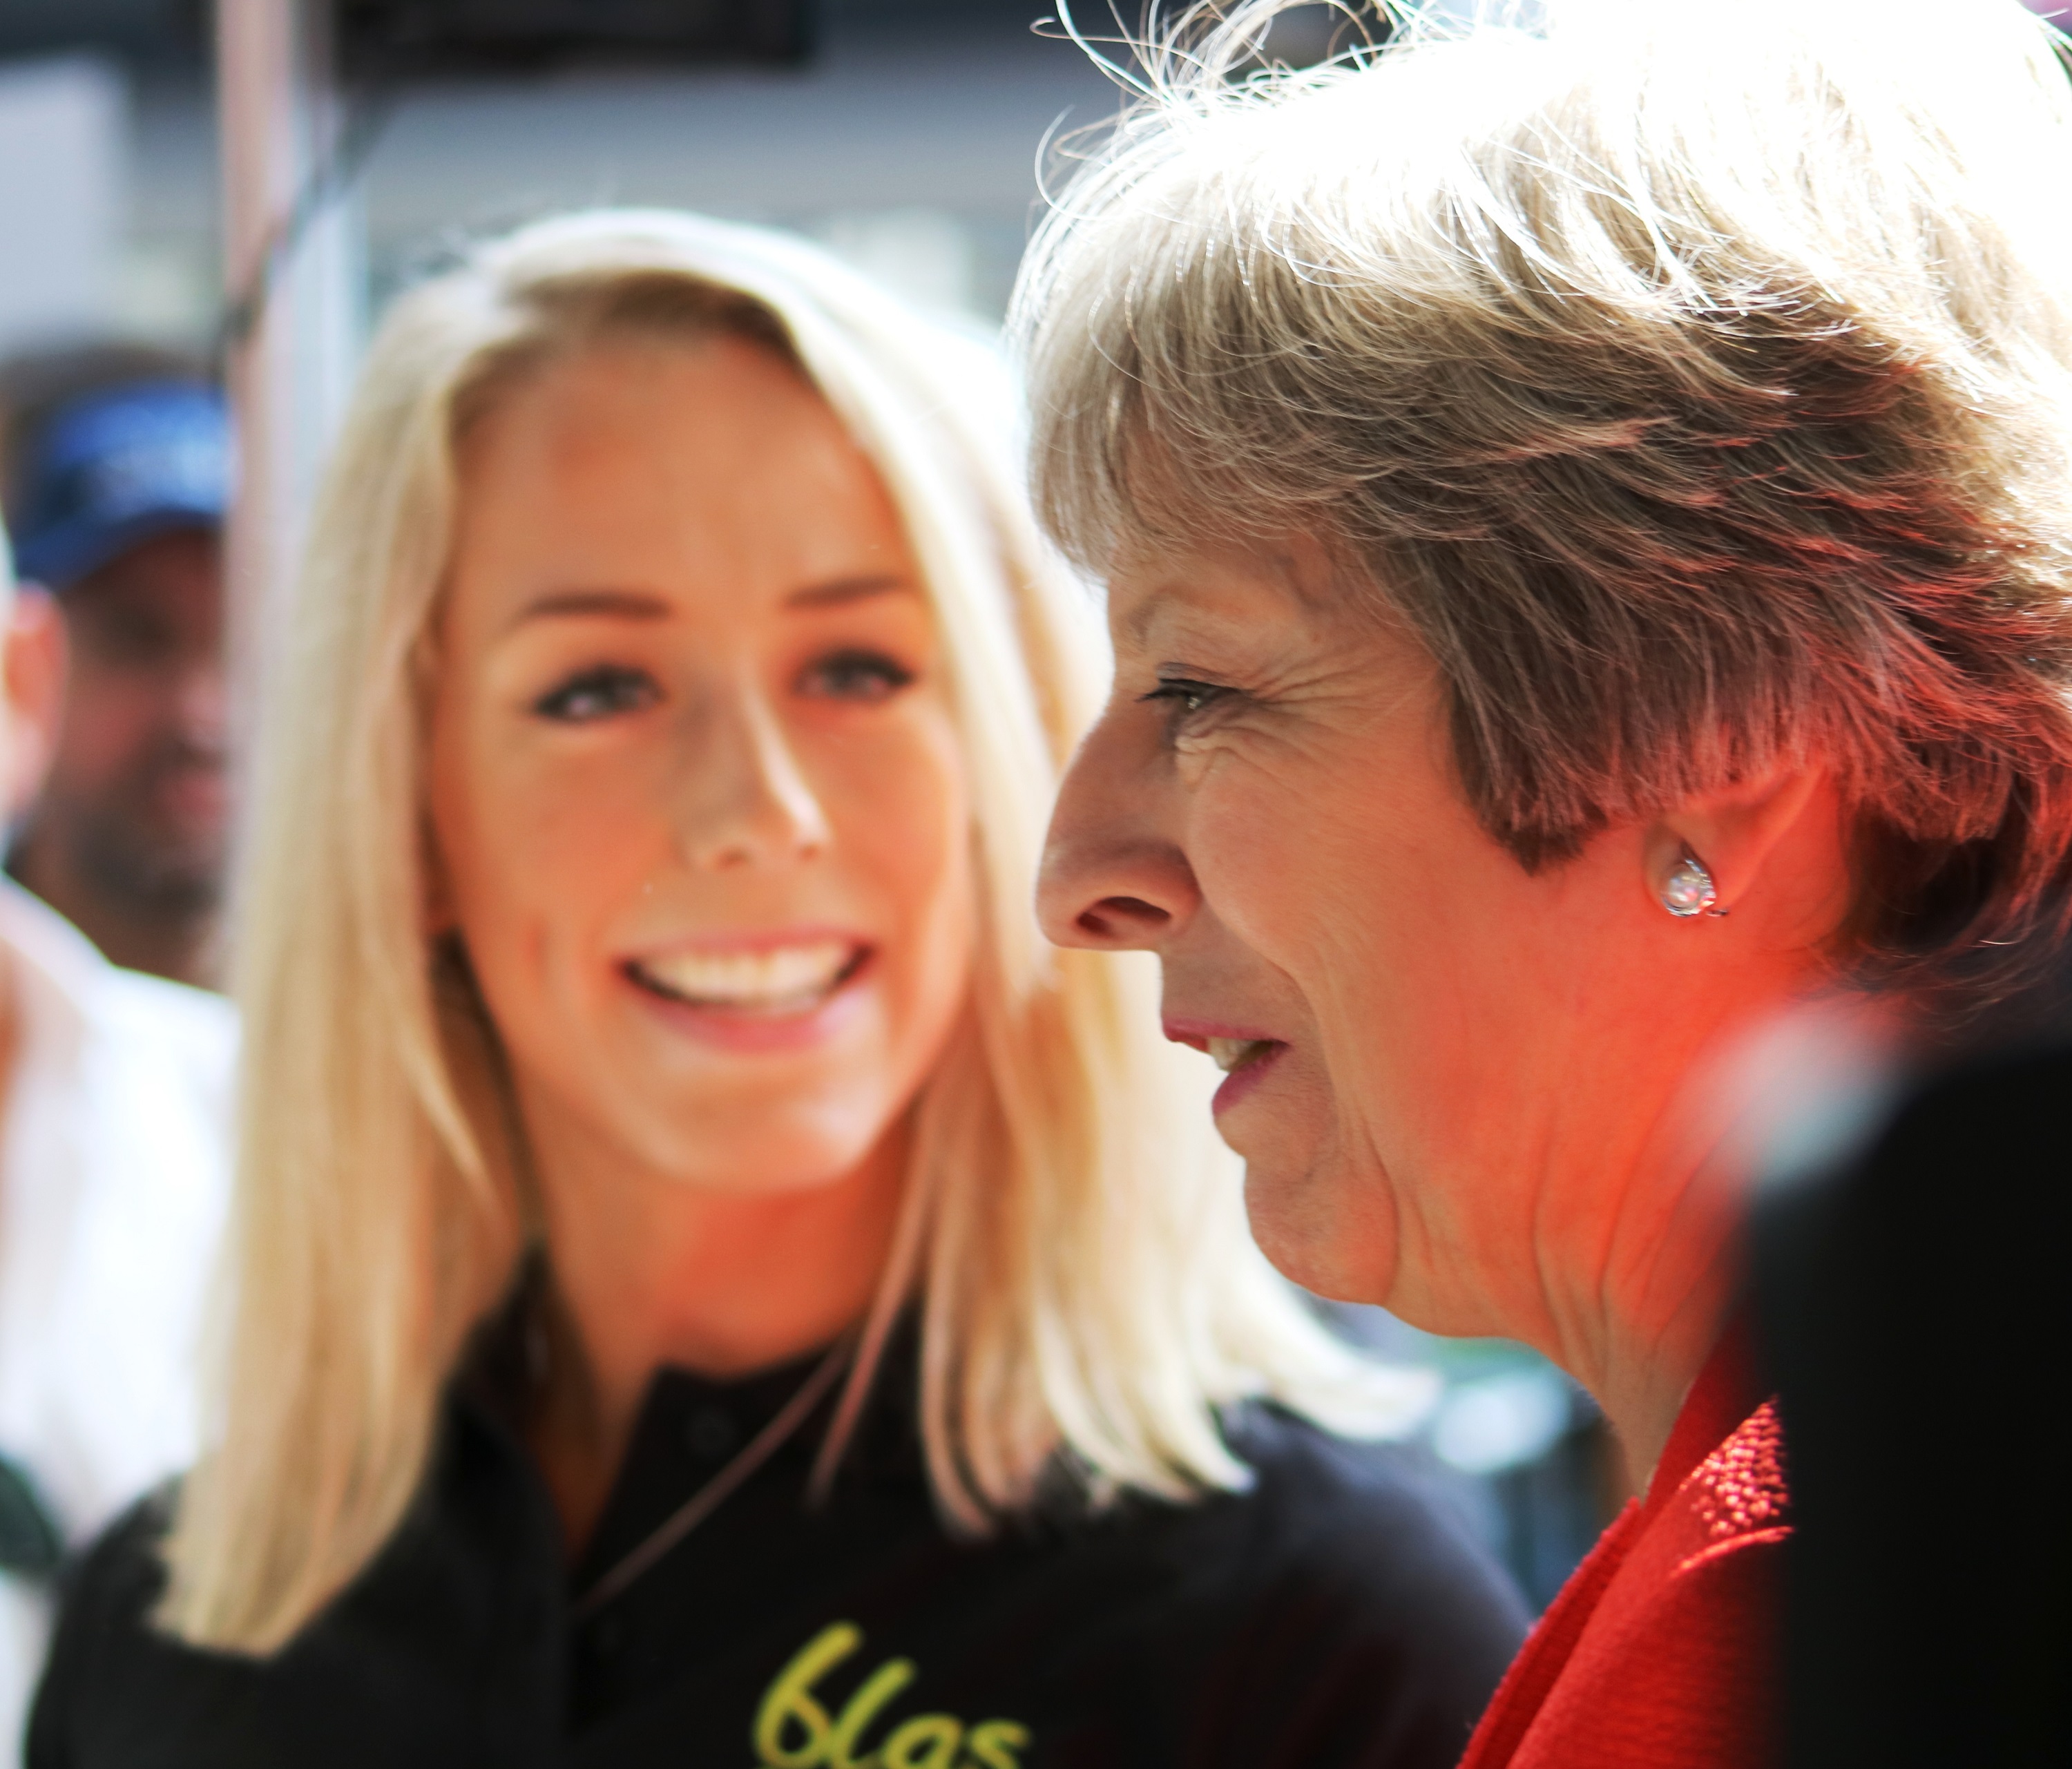 Marketing Manager Megan with Prime Minister Theresa May at the Royal Welsh Show 2018